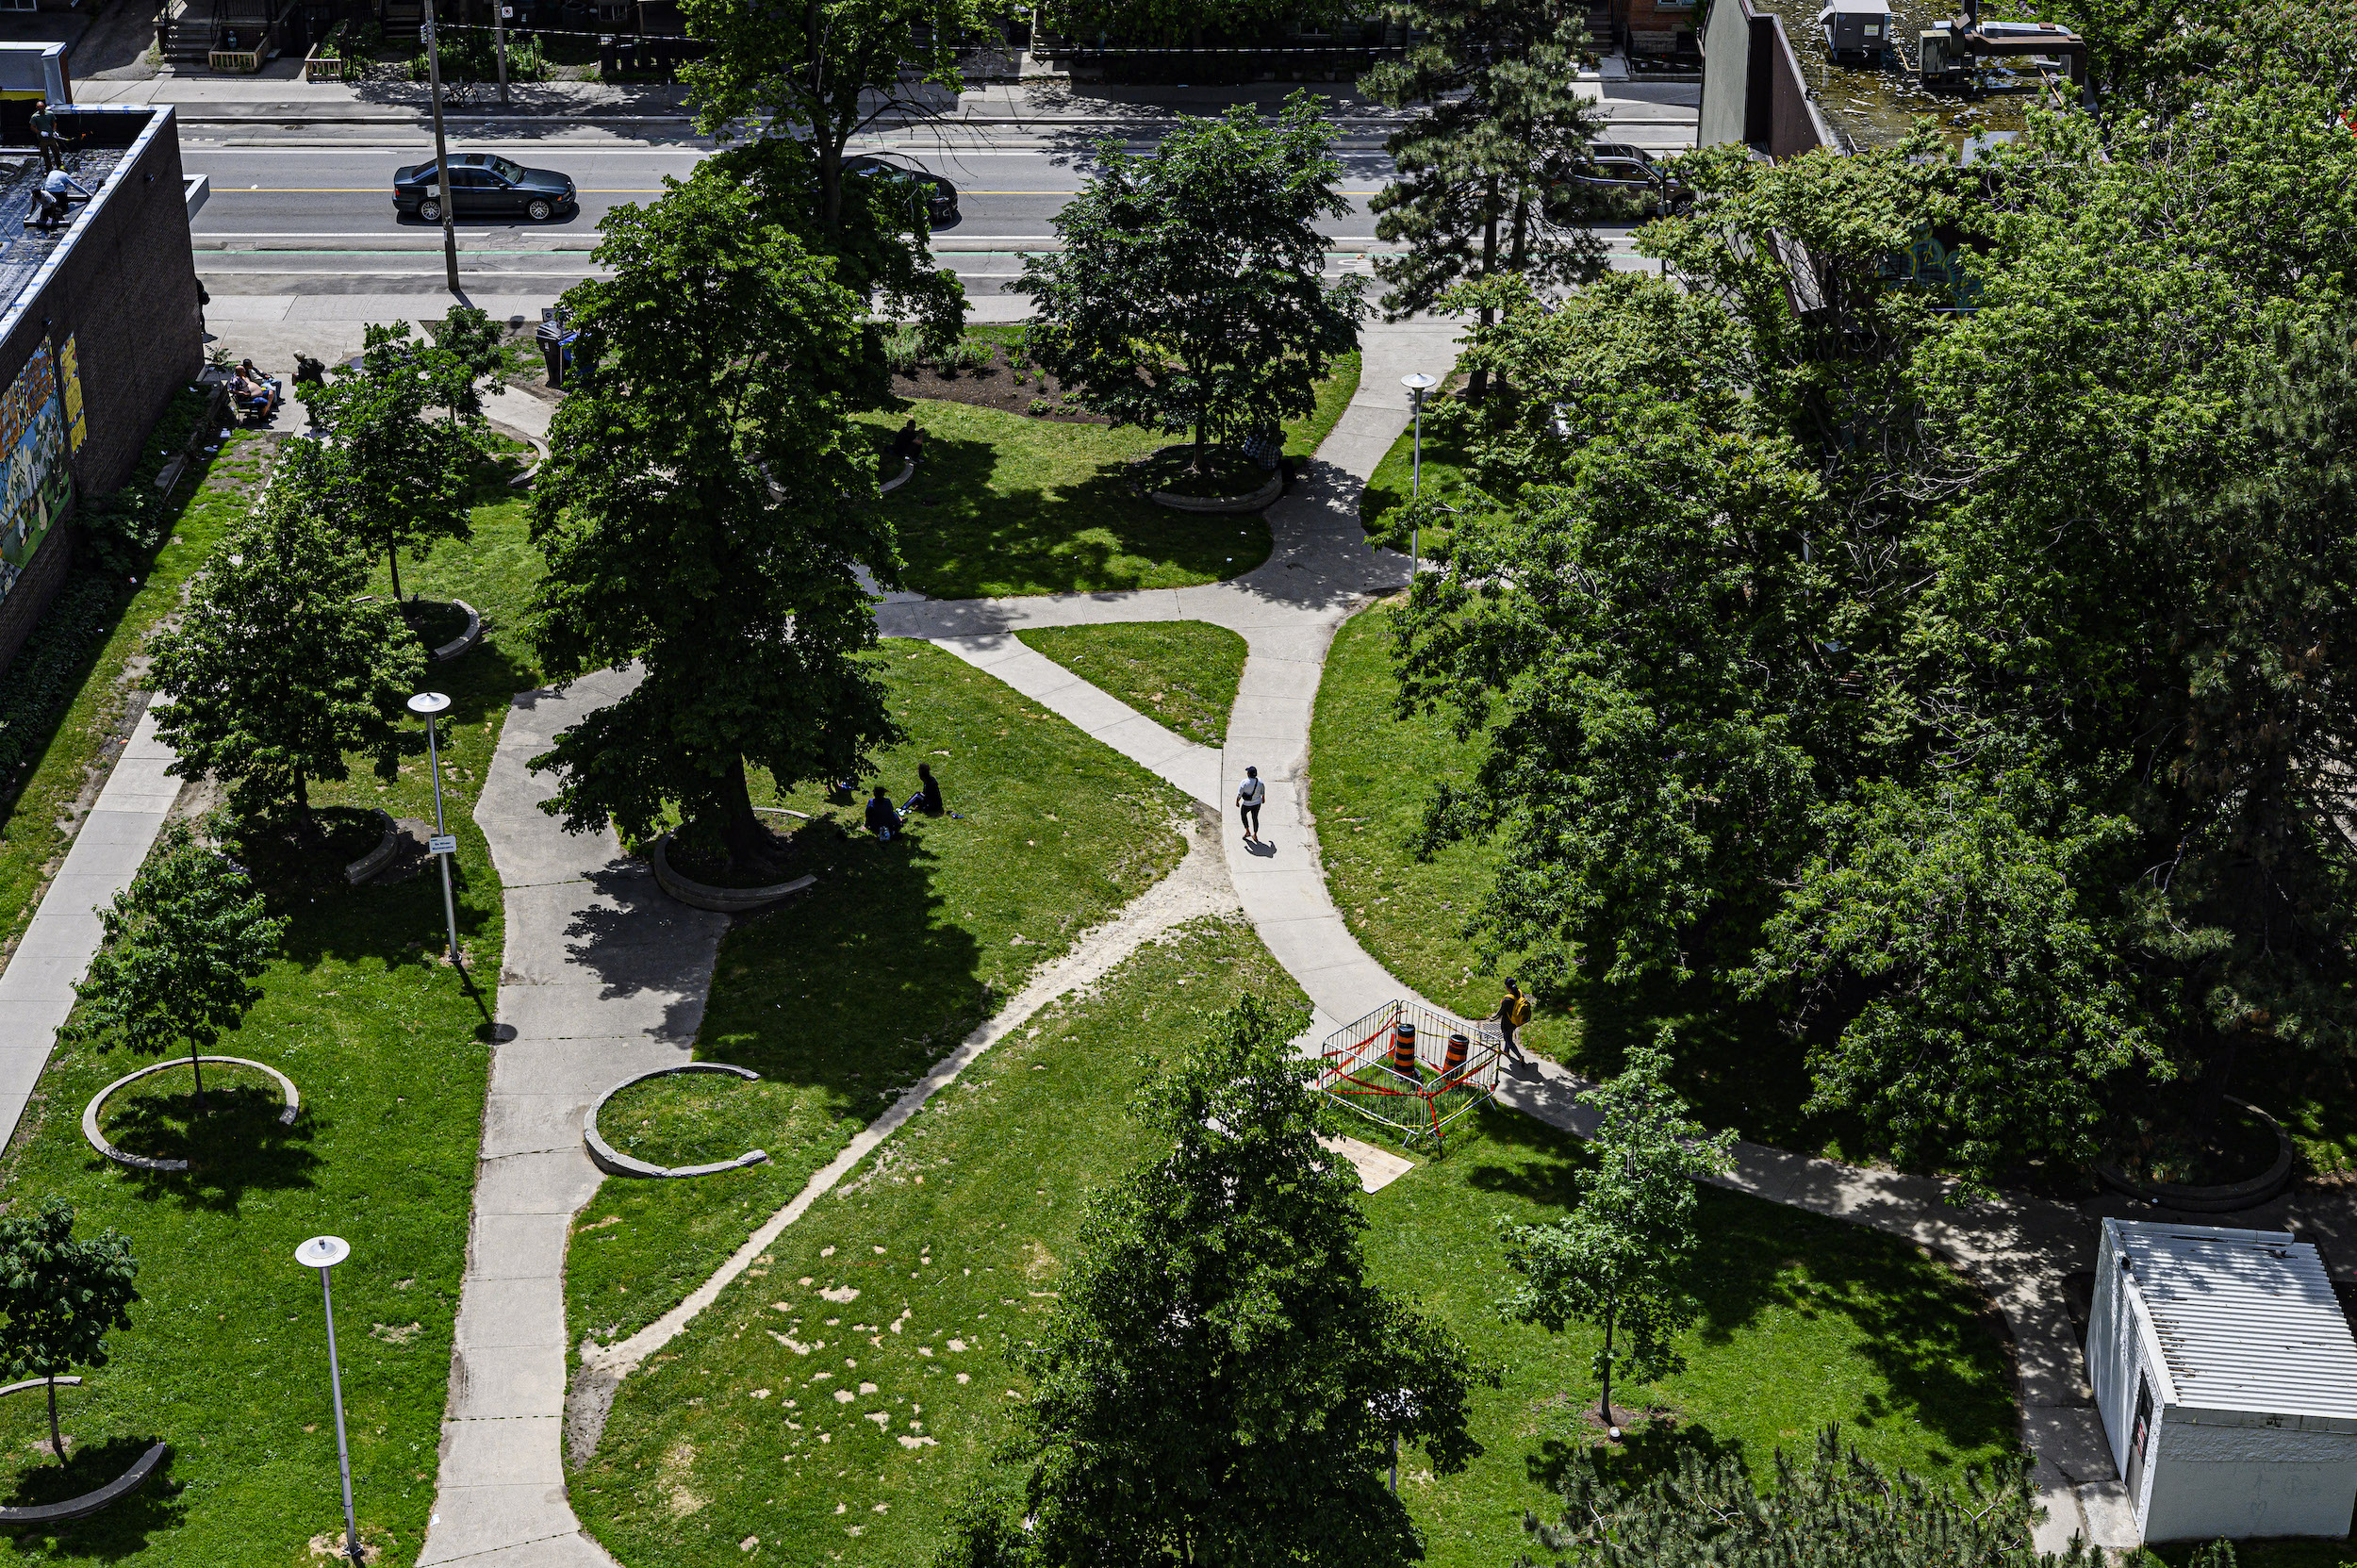 A parkette in St. Jamestown, Toronto seen from above.